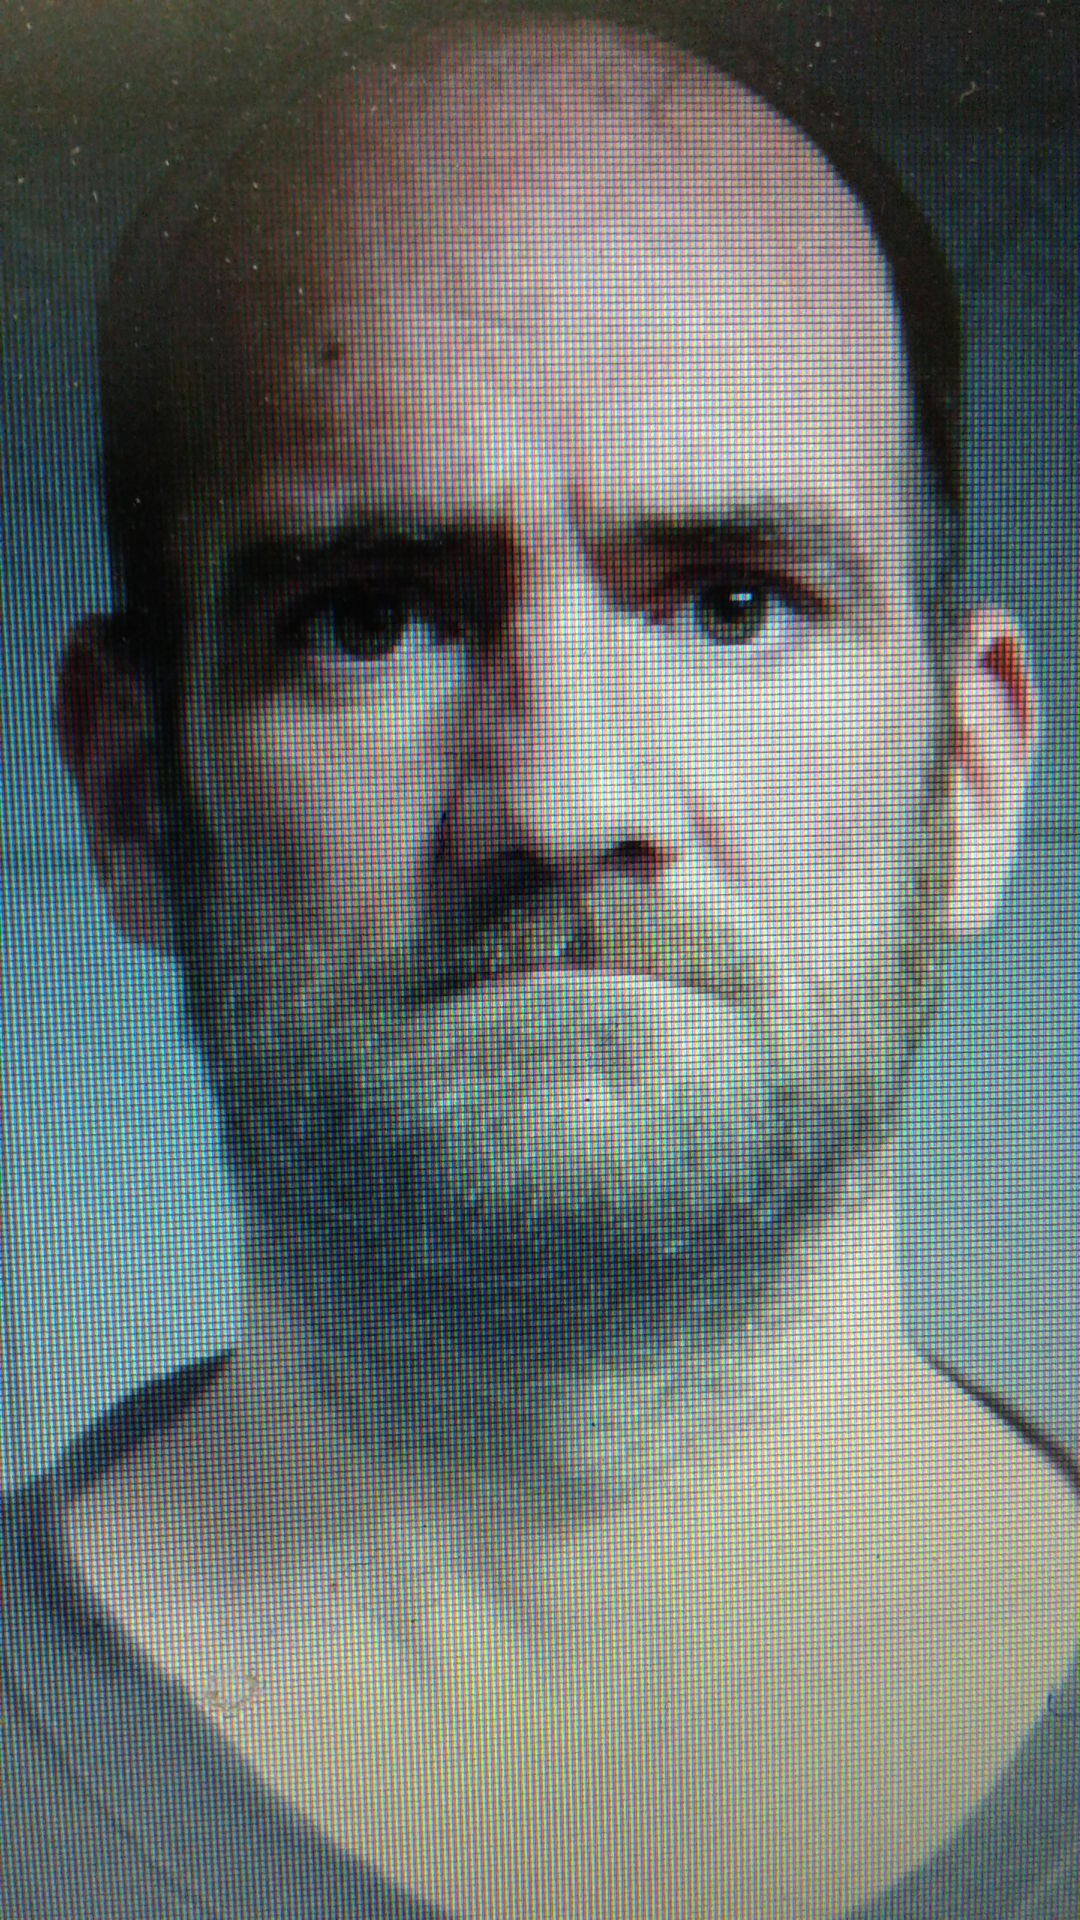 county mcdowell dui death charged wv resulting iaeger edwards woay arrested richard